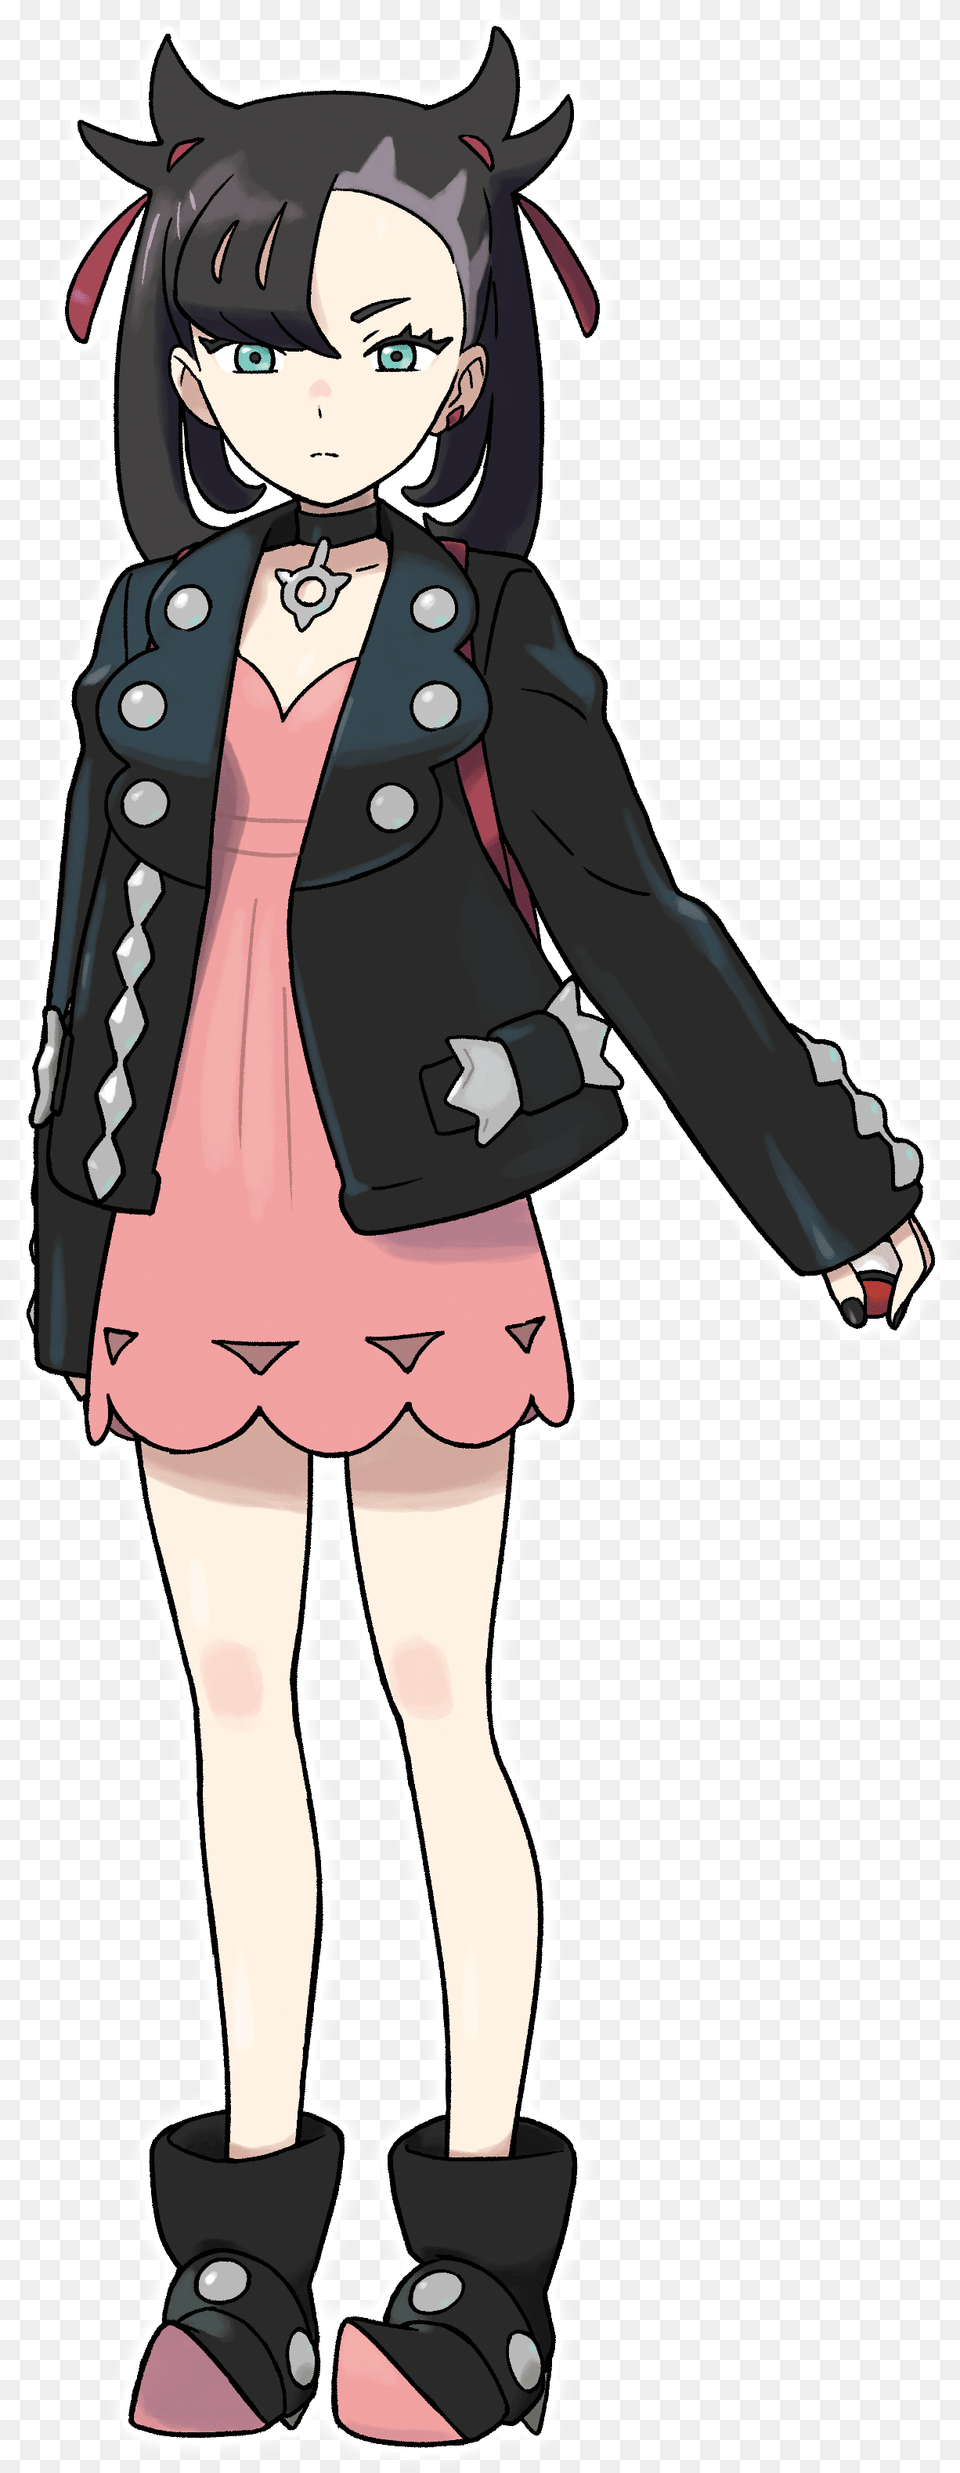 Marnie Render Pokemon Sword And Shieldpng Renders Aiktry Pokemon Rivals Sword And Shield, Book, Comics, Publication, Child Png